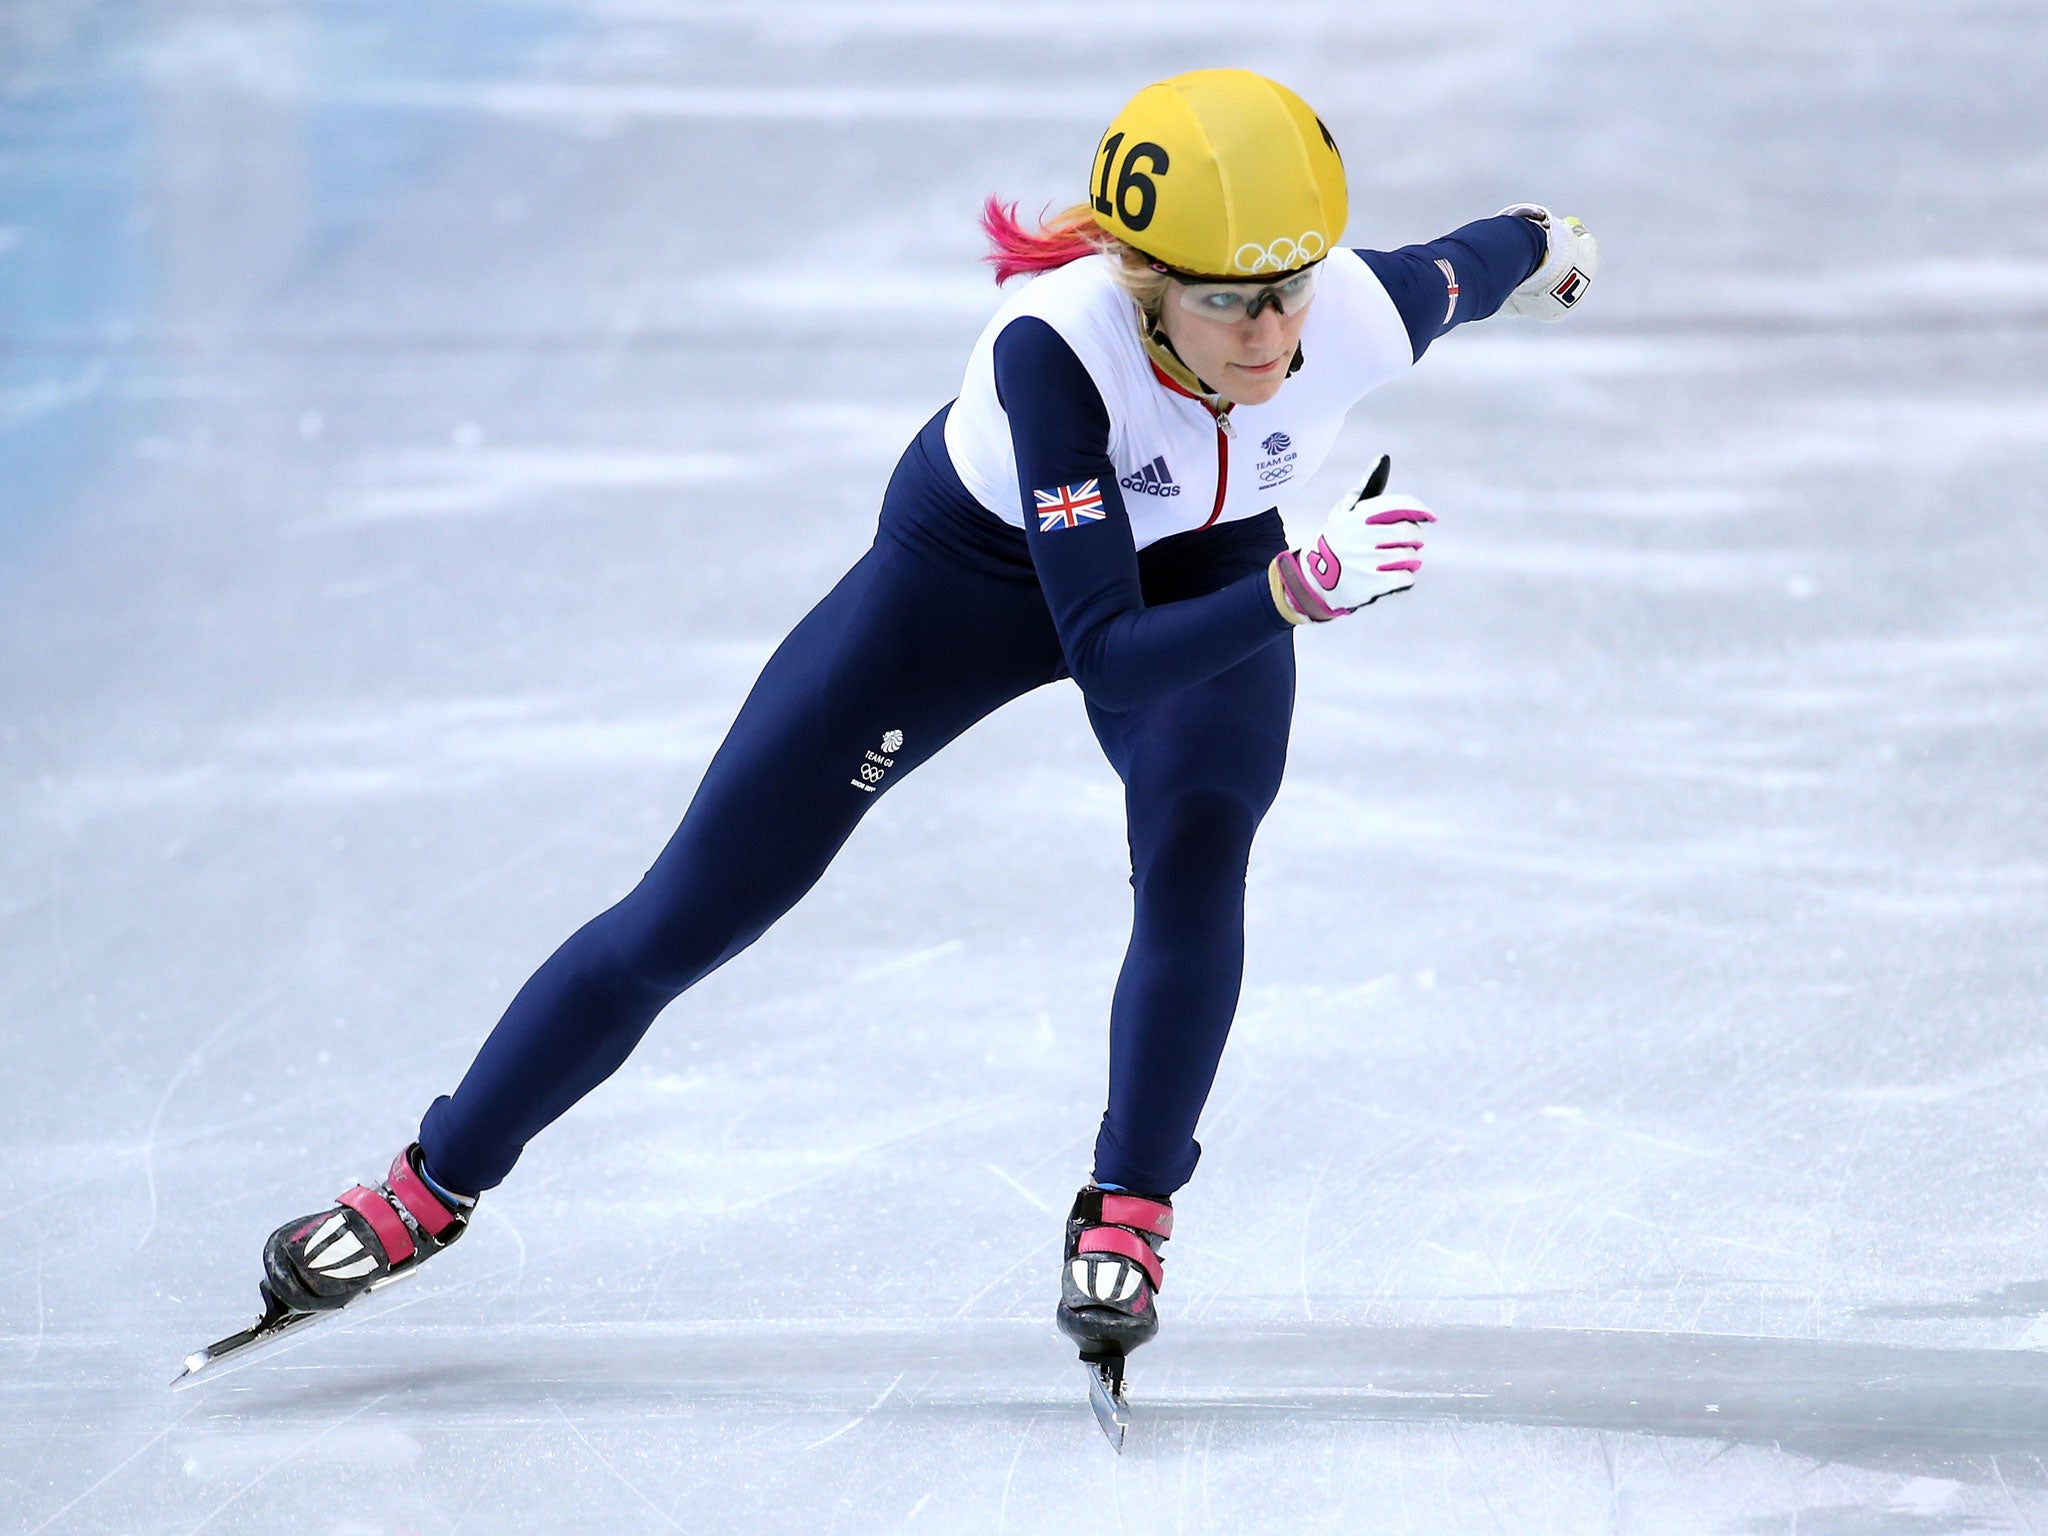 Short track speed-skater Elise Christie has reached the quarter-finals of the 1000m event